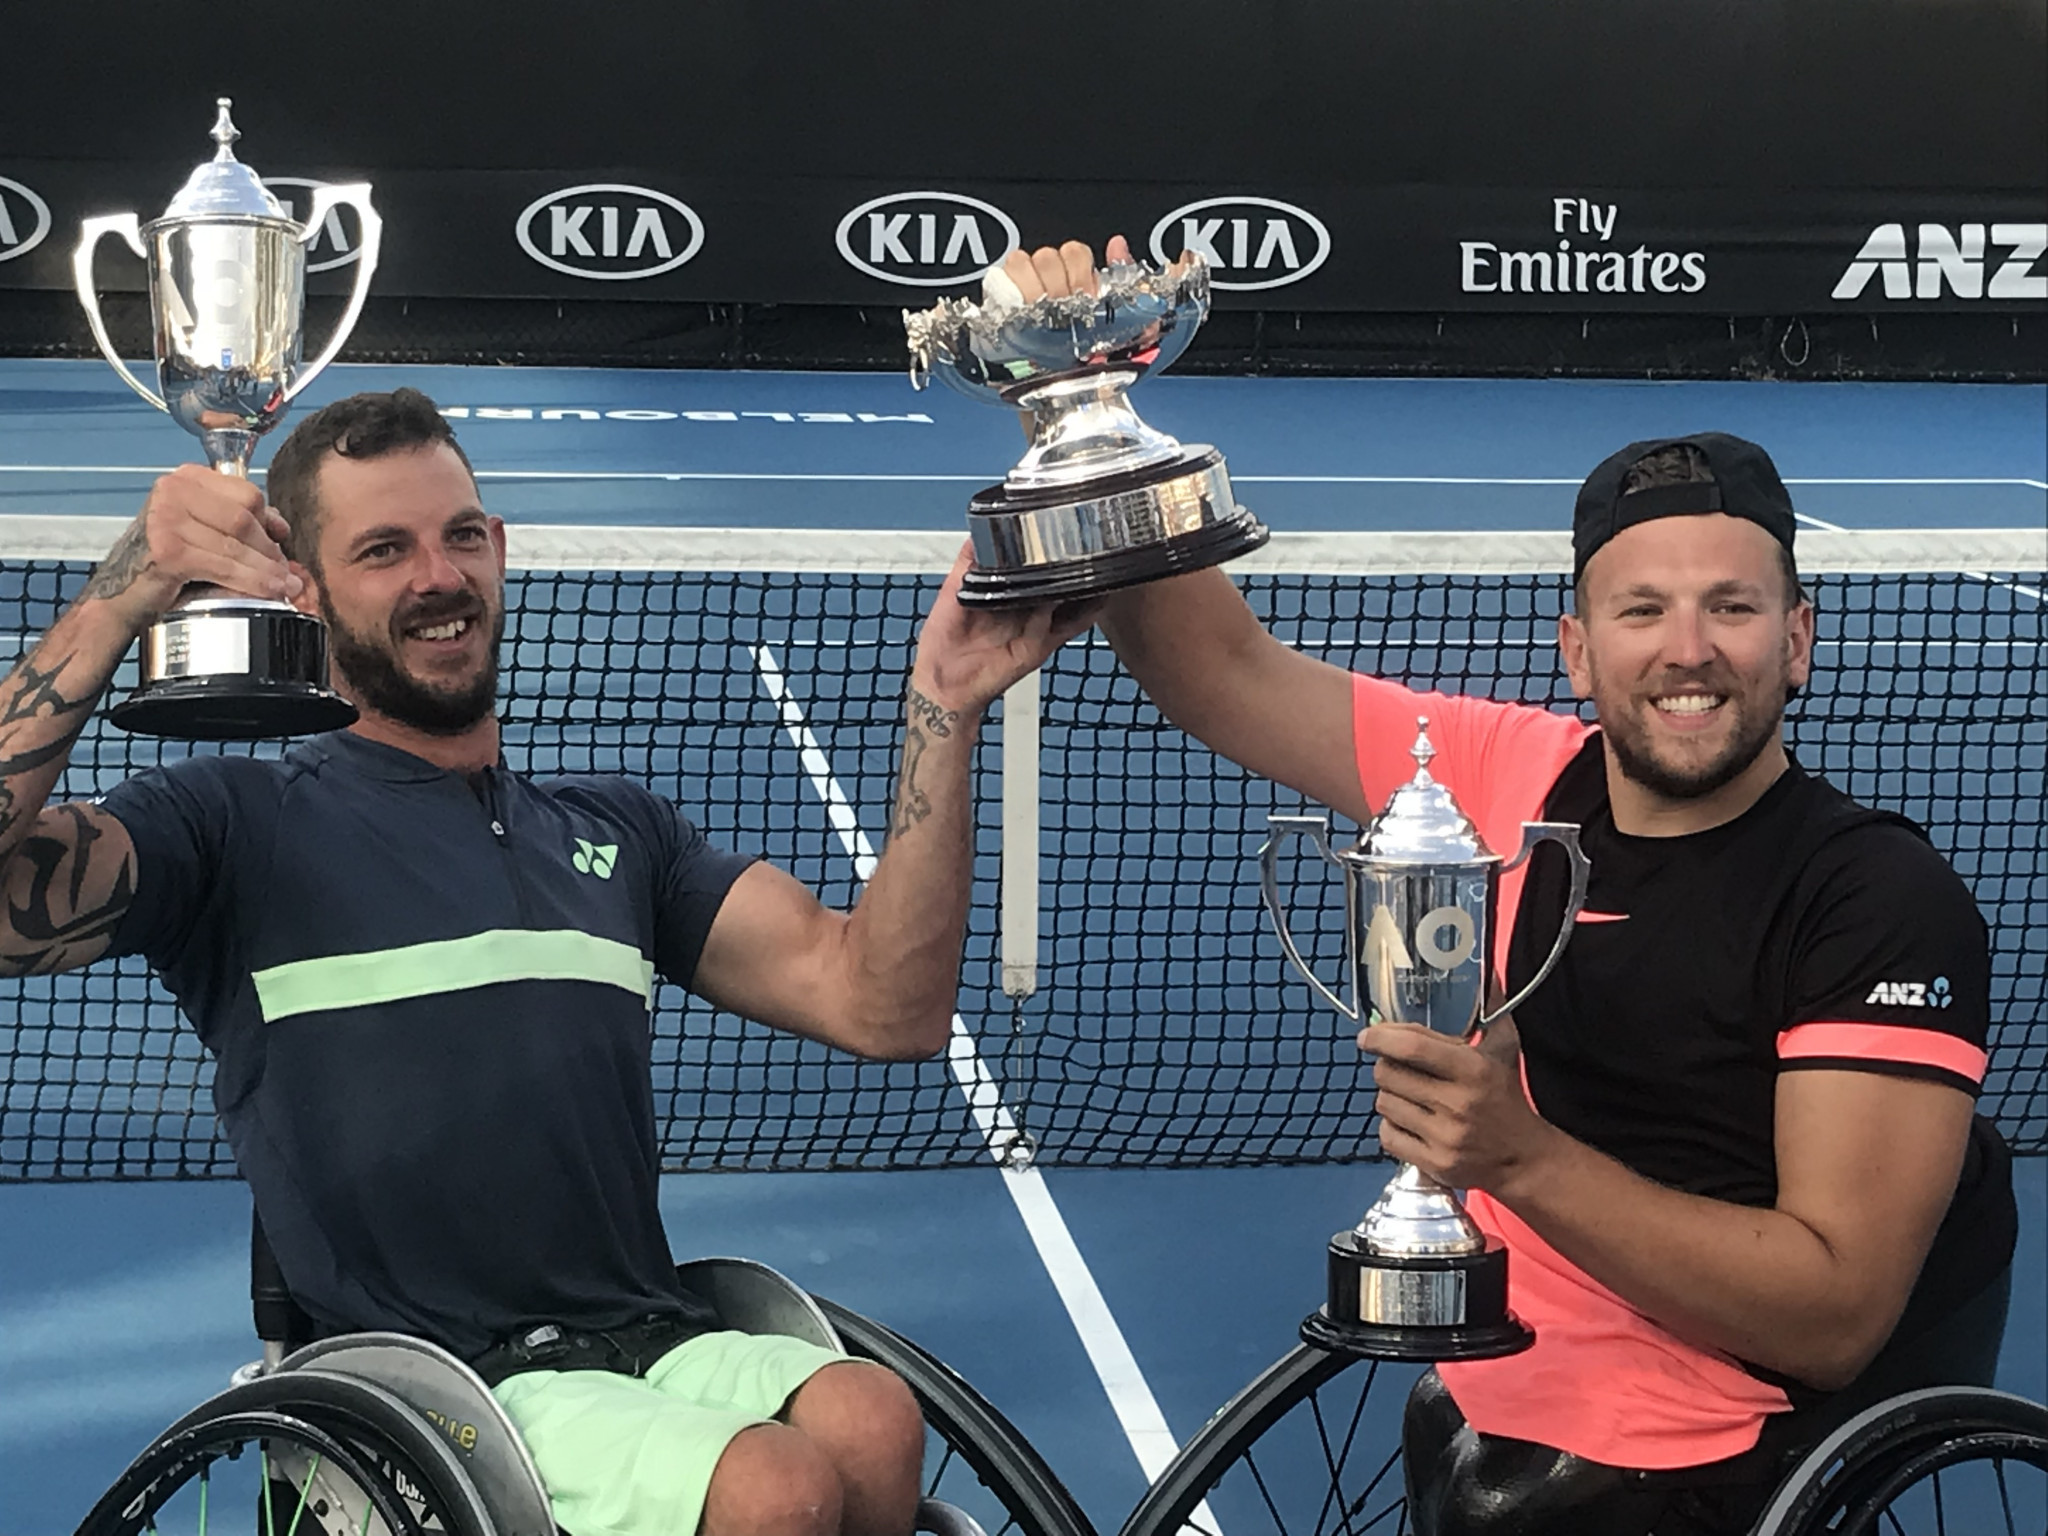 Alcott and Davidson give home fans reason to celebrate with quads victory at Australian Open